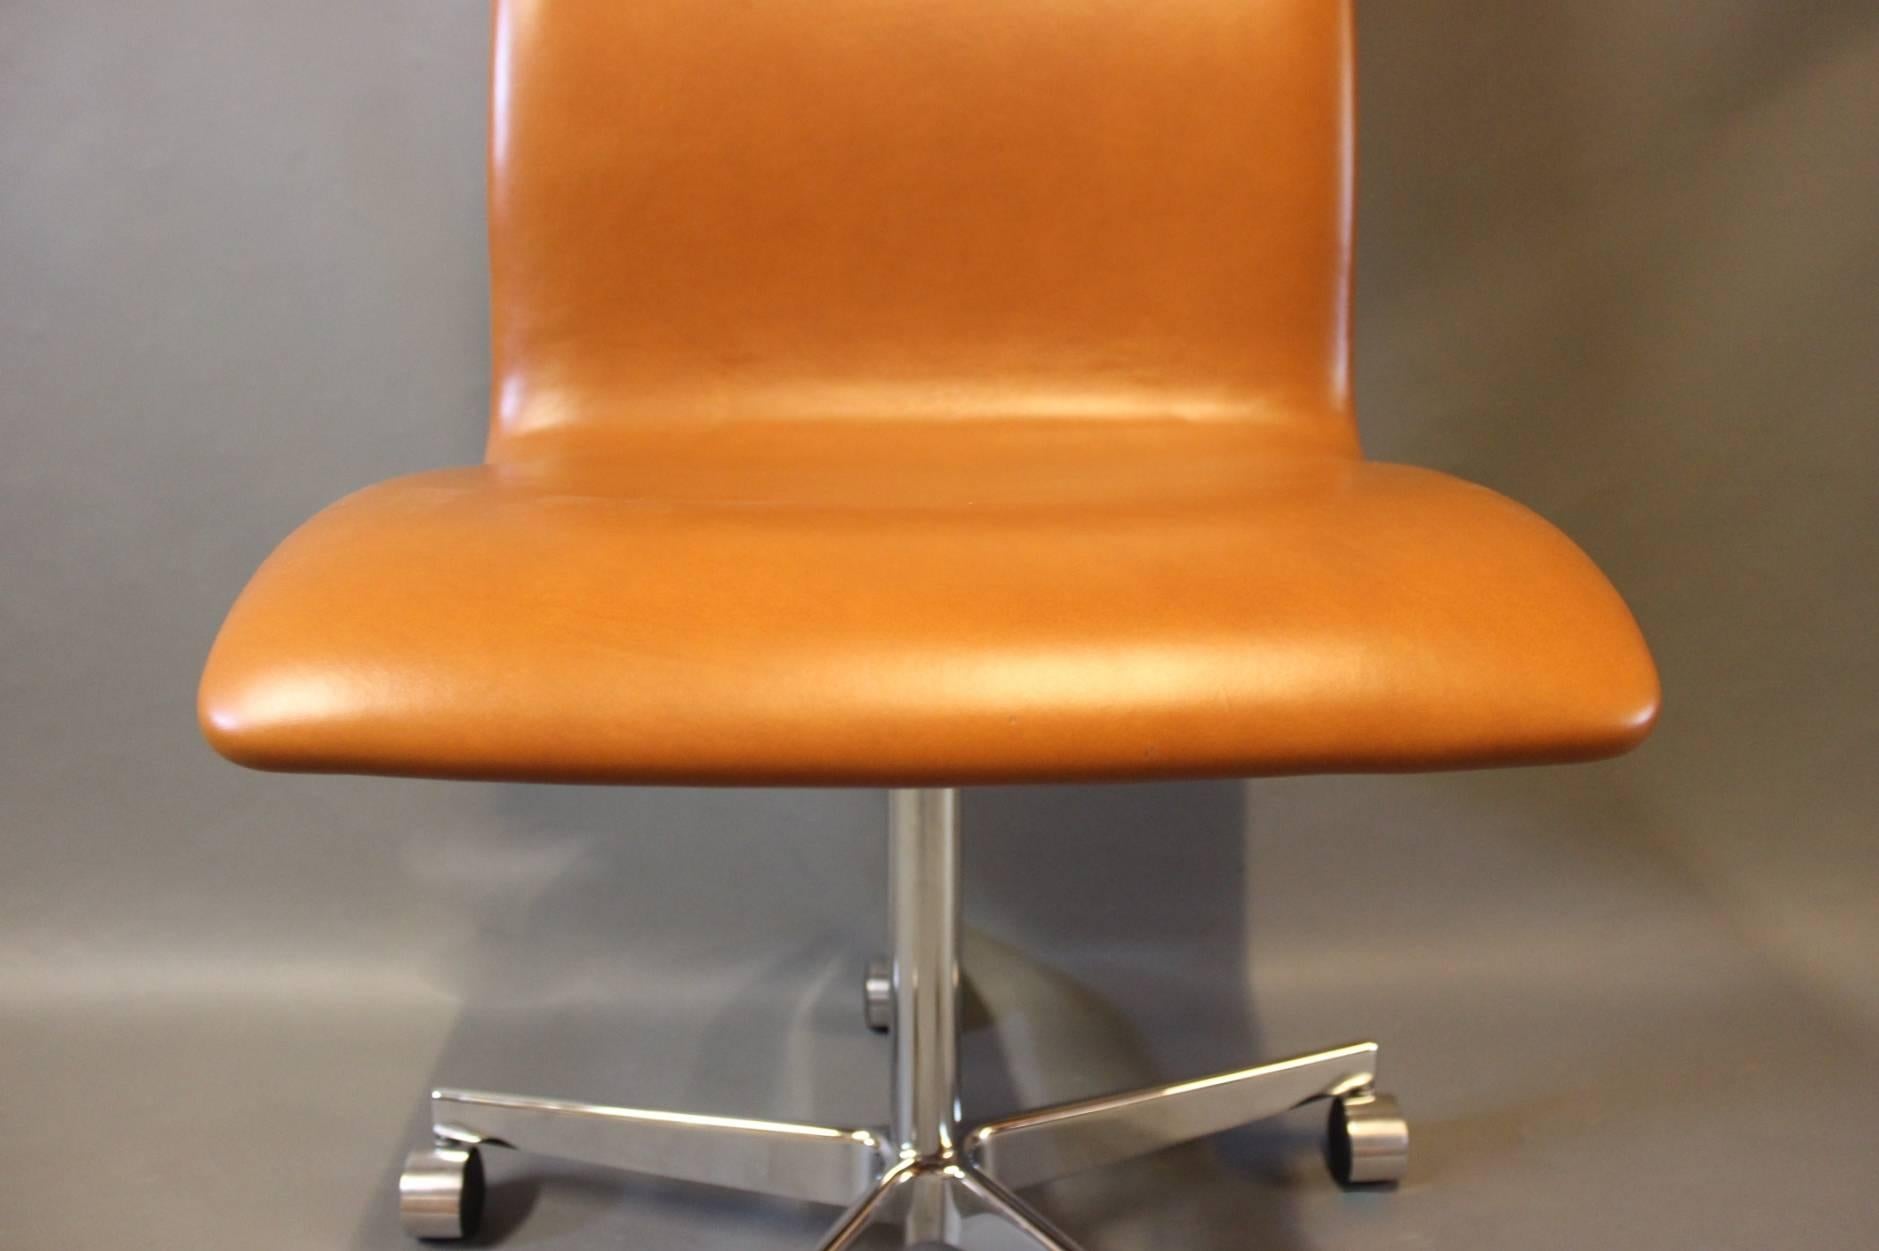 Oxford Classic Chair, Model 3193C, by Arne Jacobsen and Fritz Hansen 1